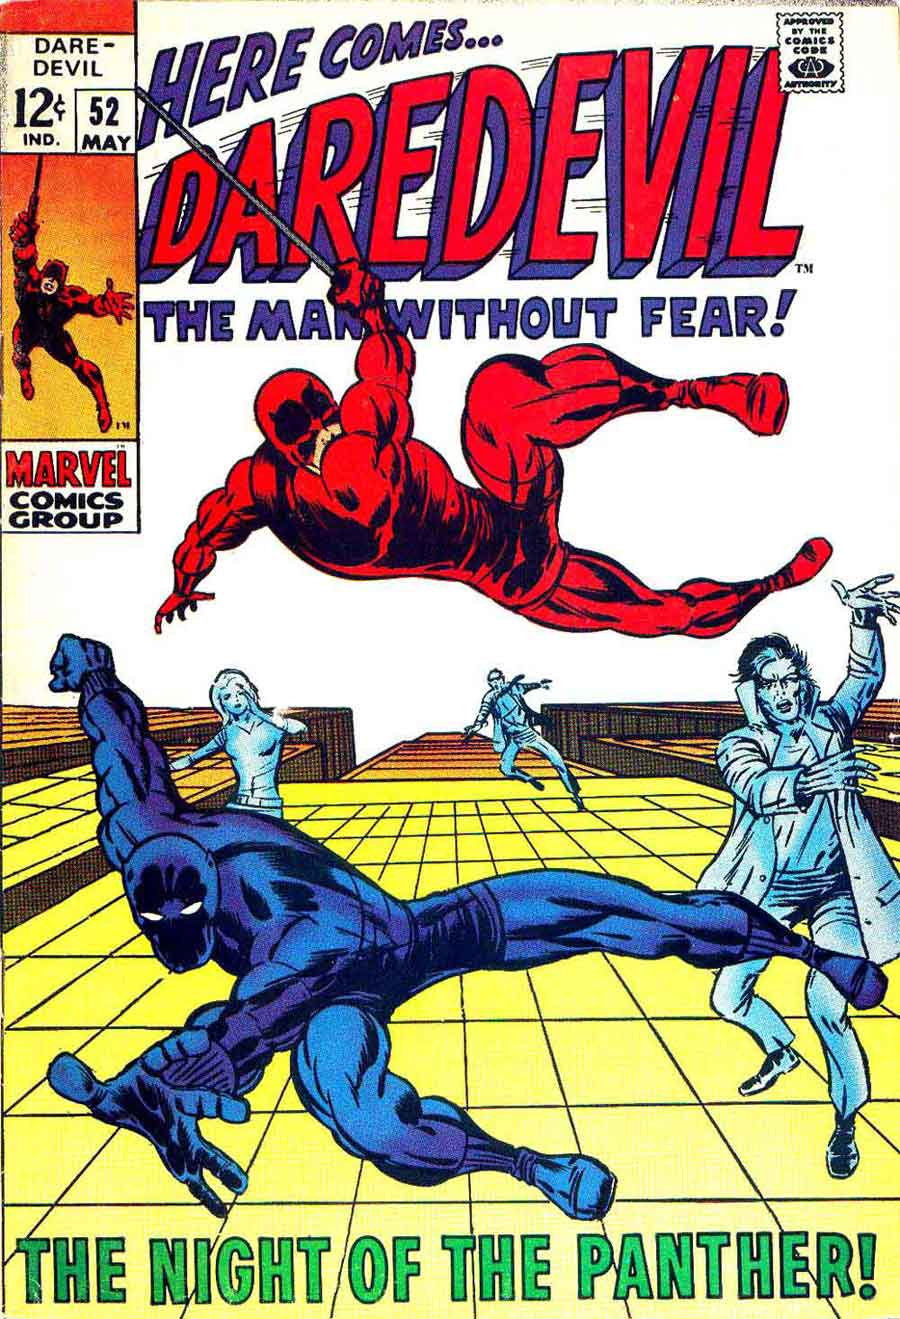 Daredevil v1 #52 marvel 1960s silver age comic book cover art by Barry Windsor Smith